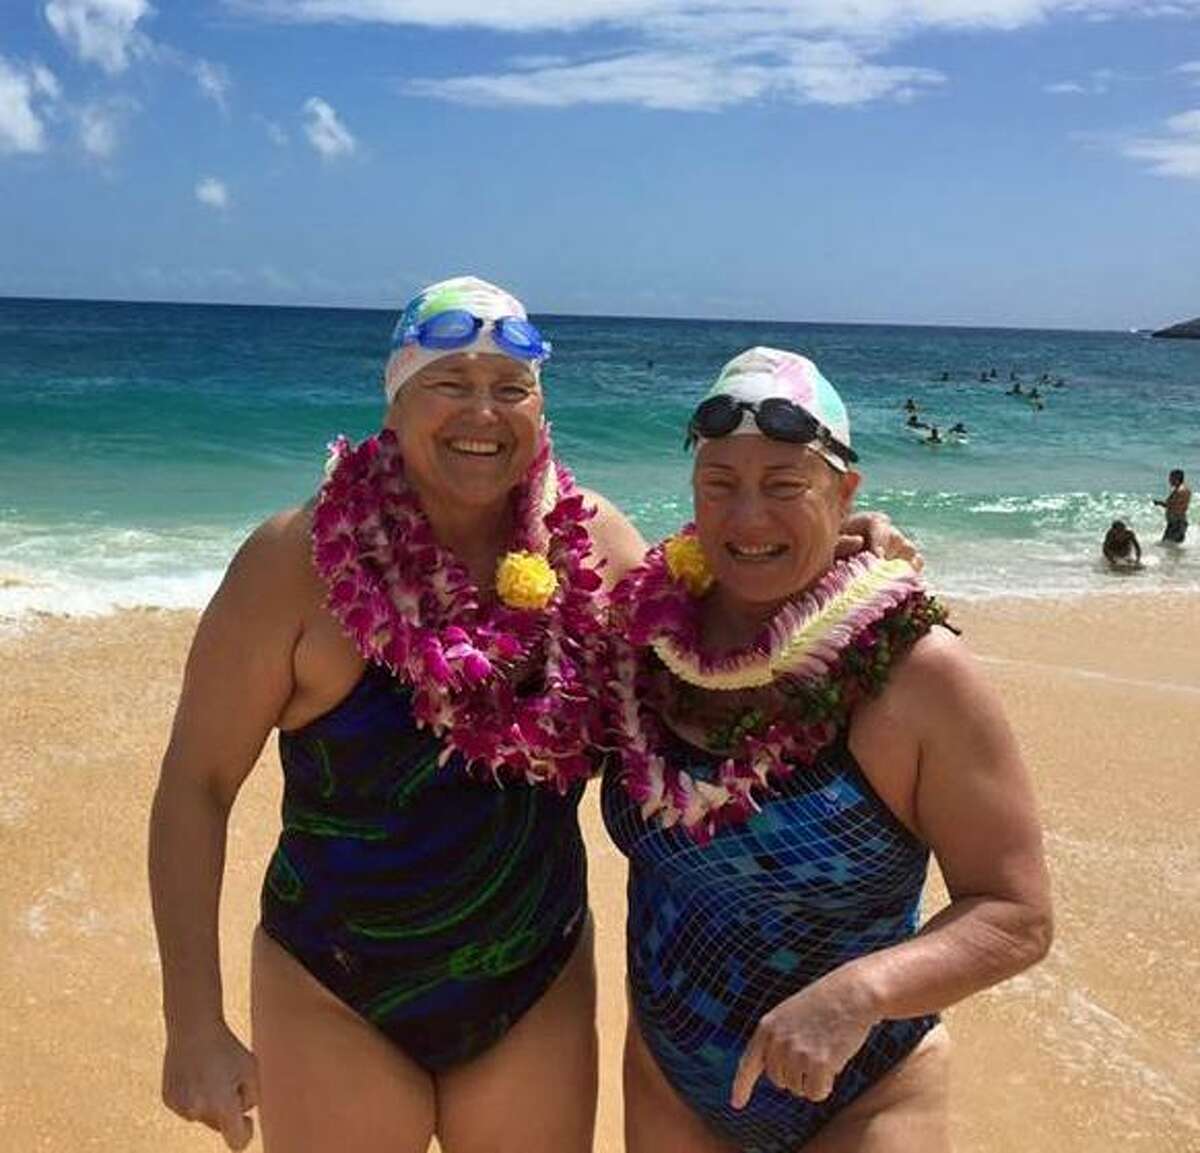 Westport's Elizabeth Fry (right) swam 17 hours and 30 minutes across the 42 kilometer Molokai Channel.